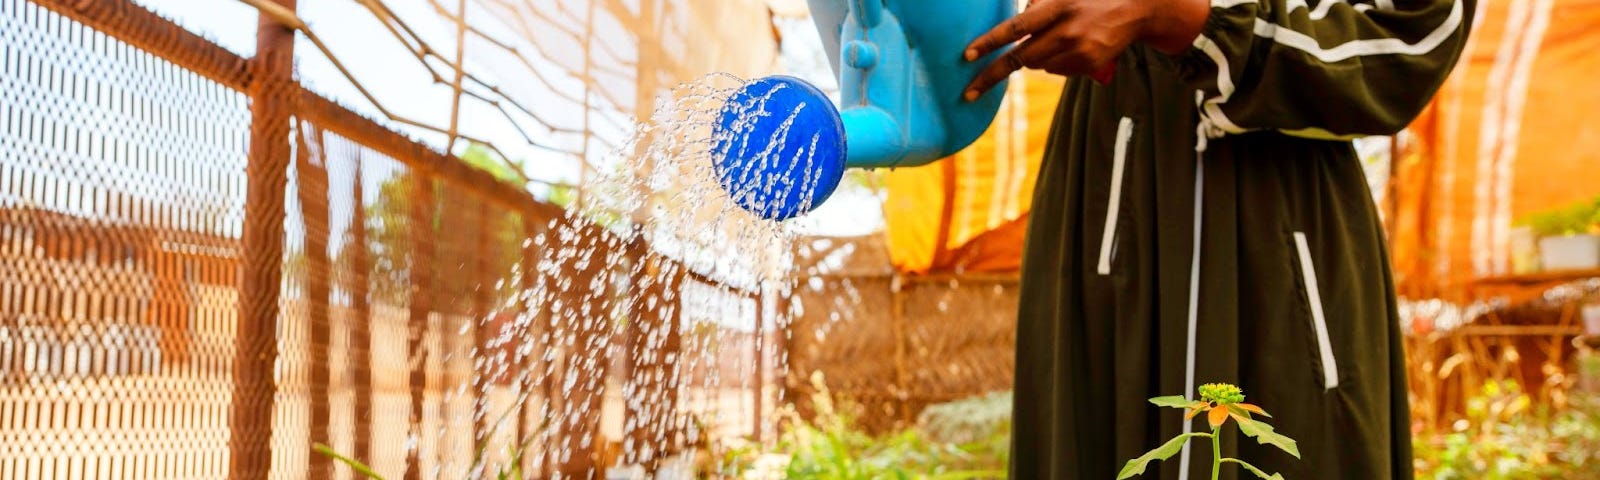 A person waters green plants next to a fence using a blue watering can.